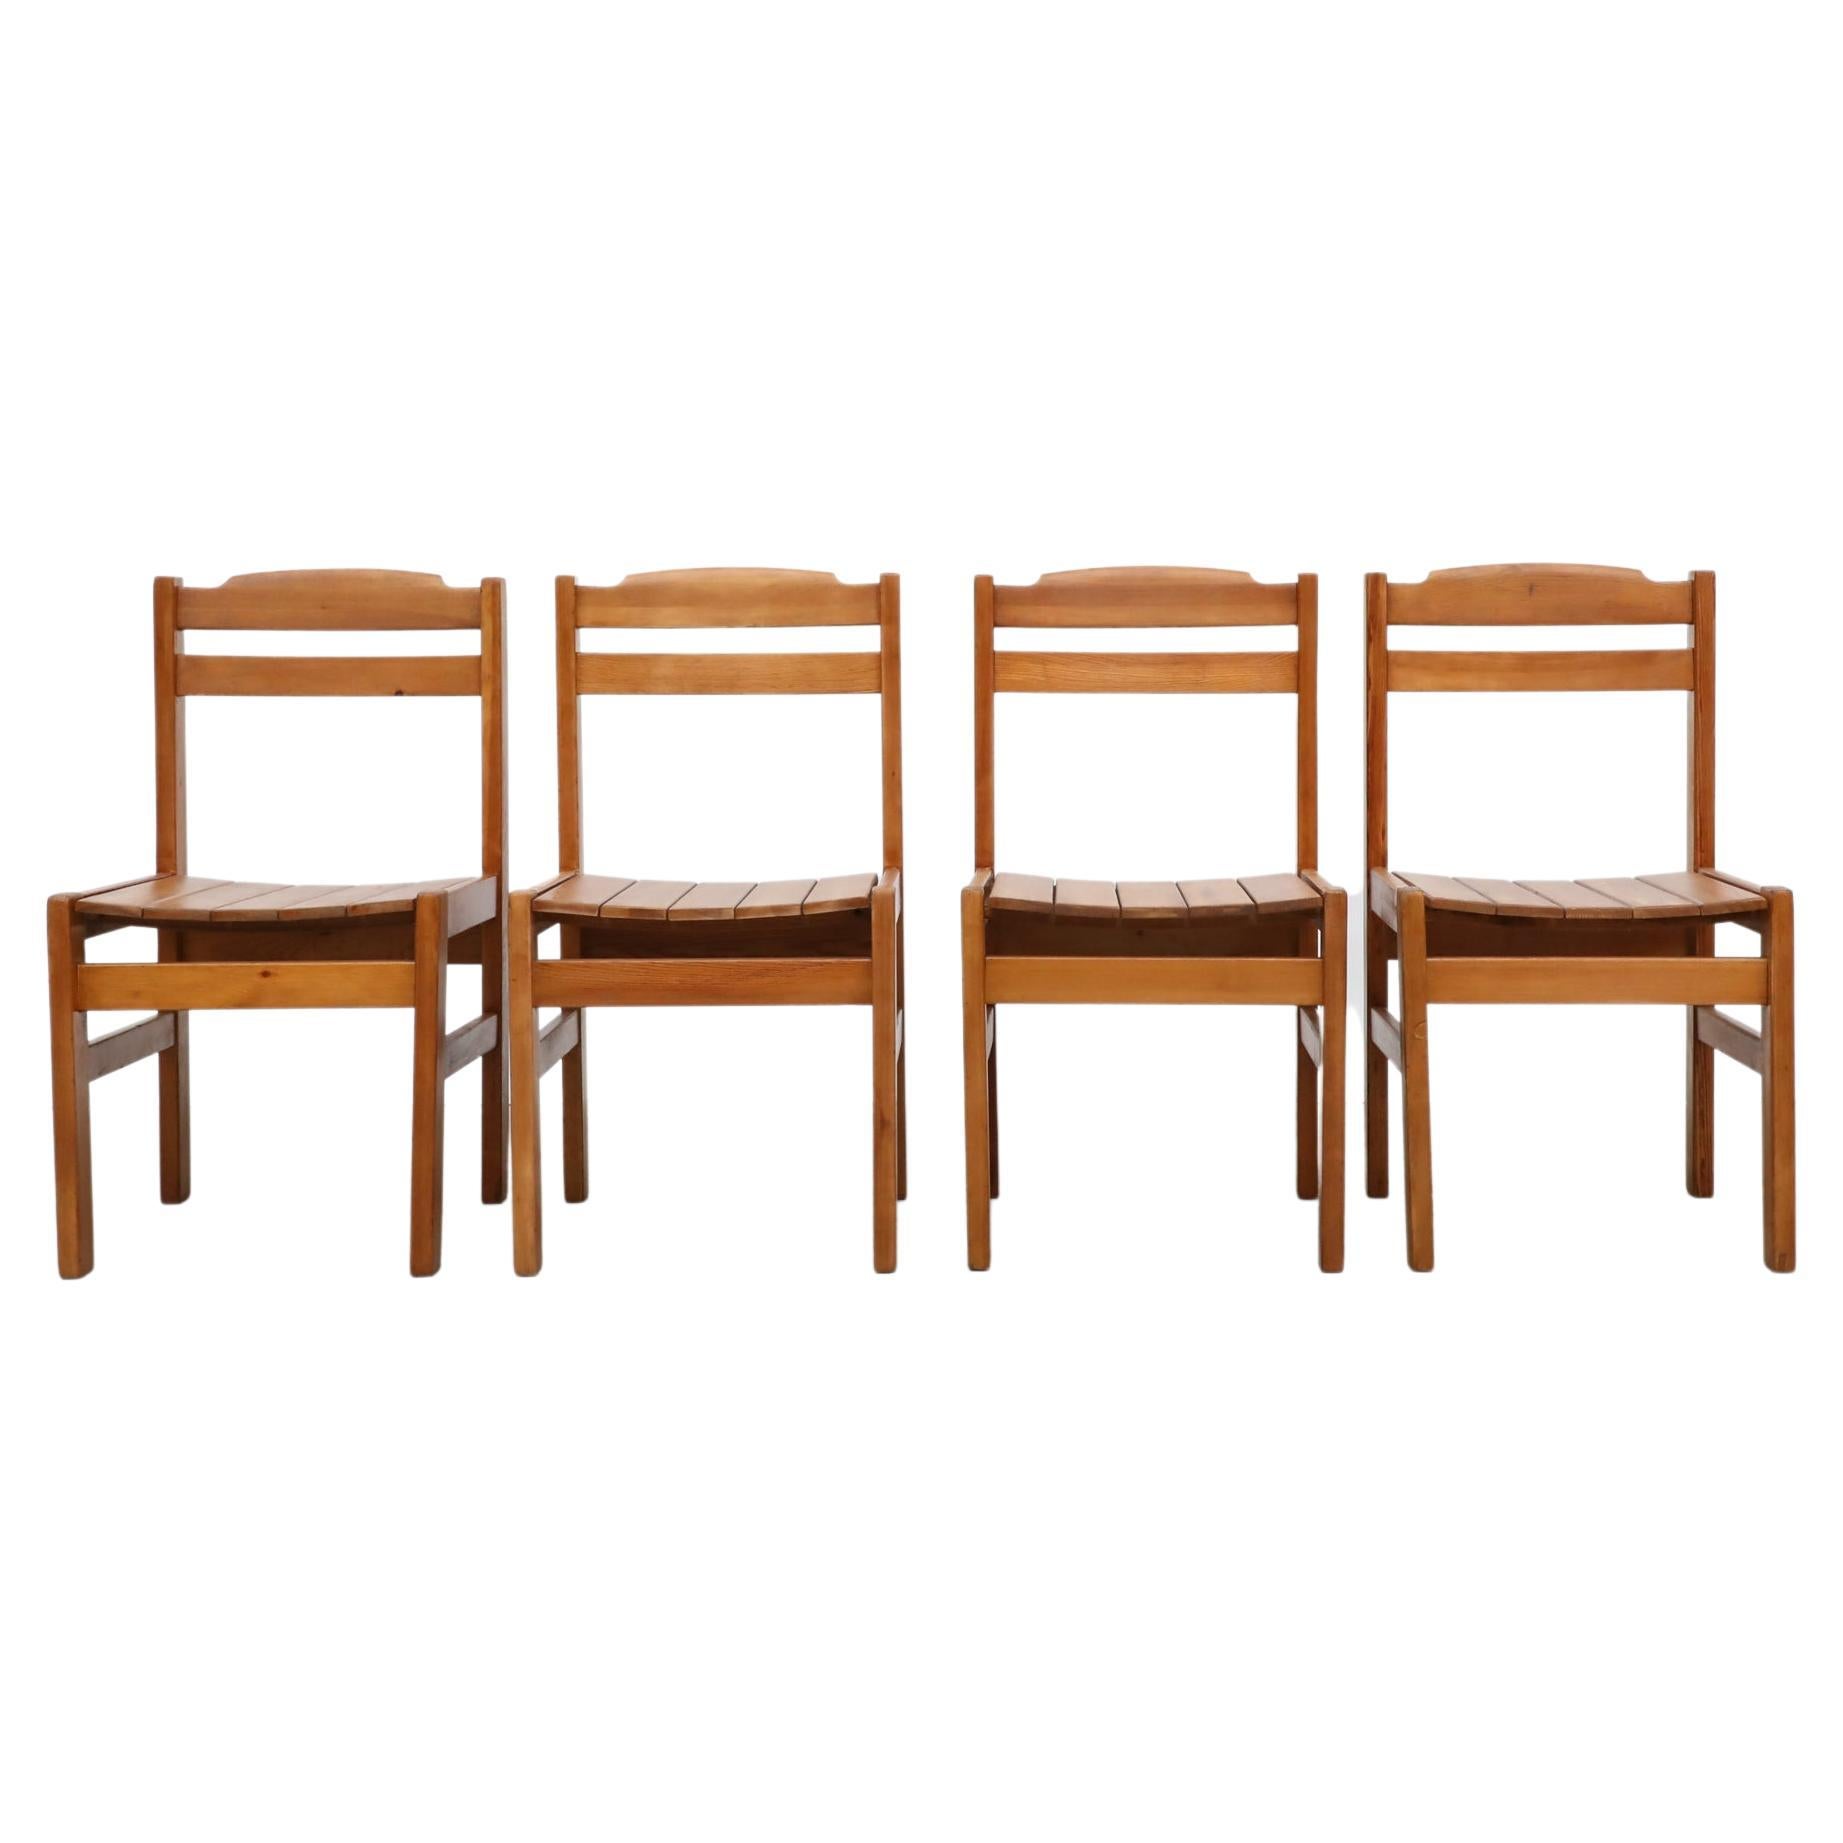 Set of 4 Ate van Apeldoorn Style Slatted Pine Dining Chairs with Lovely Top Rail For Sale